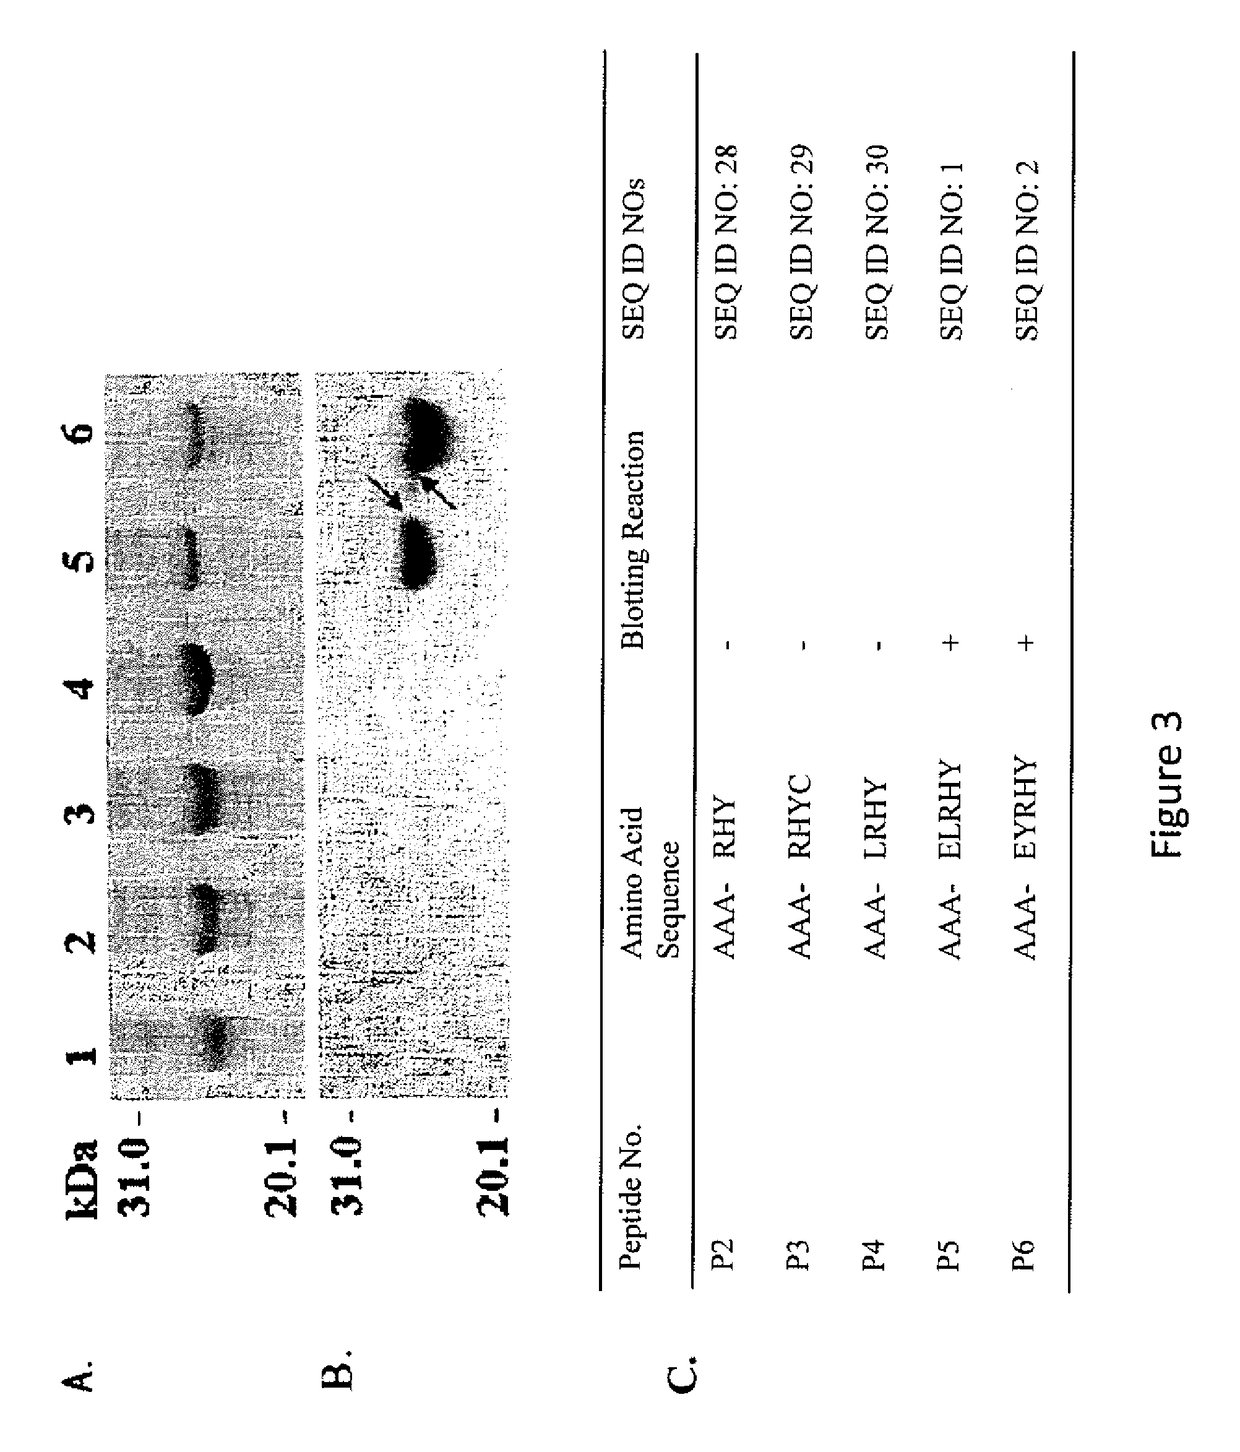 Fine epitope peptide capable of inducing cross-reactive antibodies among homologous proteins in human papilloma virus E6 protein